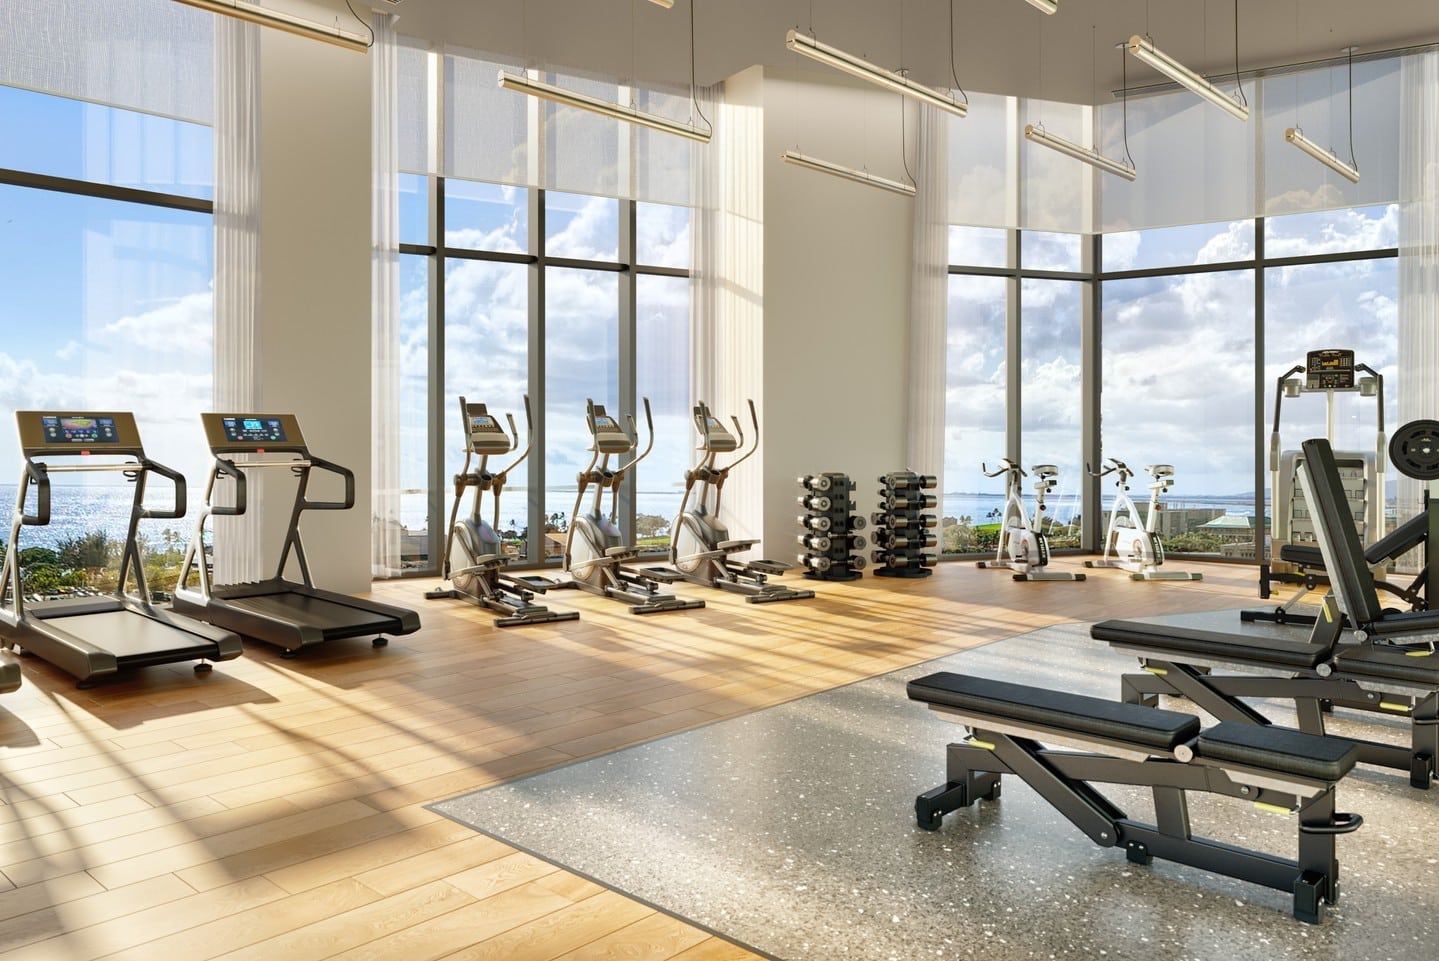 Kōʻula’s one-of-a-kind leisure and fitness spaces on Level 8 create a relaxed, calming atmosphere for everyday living. Visit www.koulawardvillage.com to learn more about these residences opening this Fall.